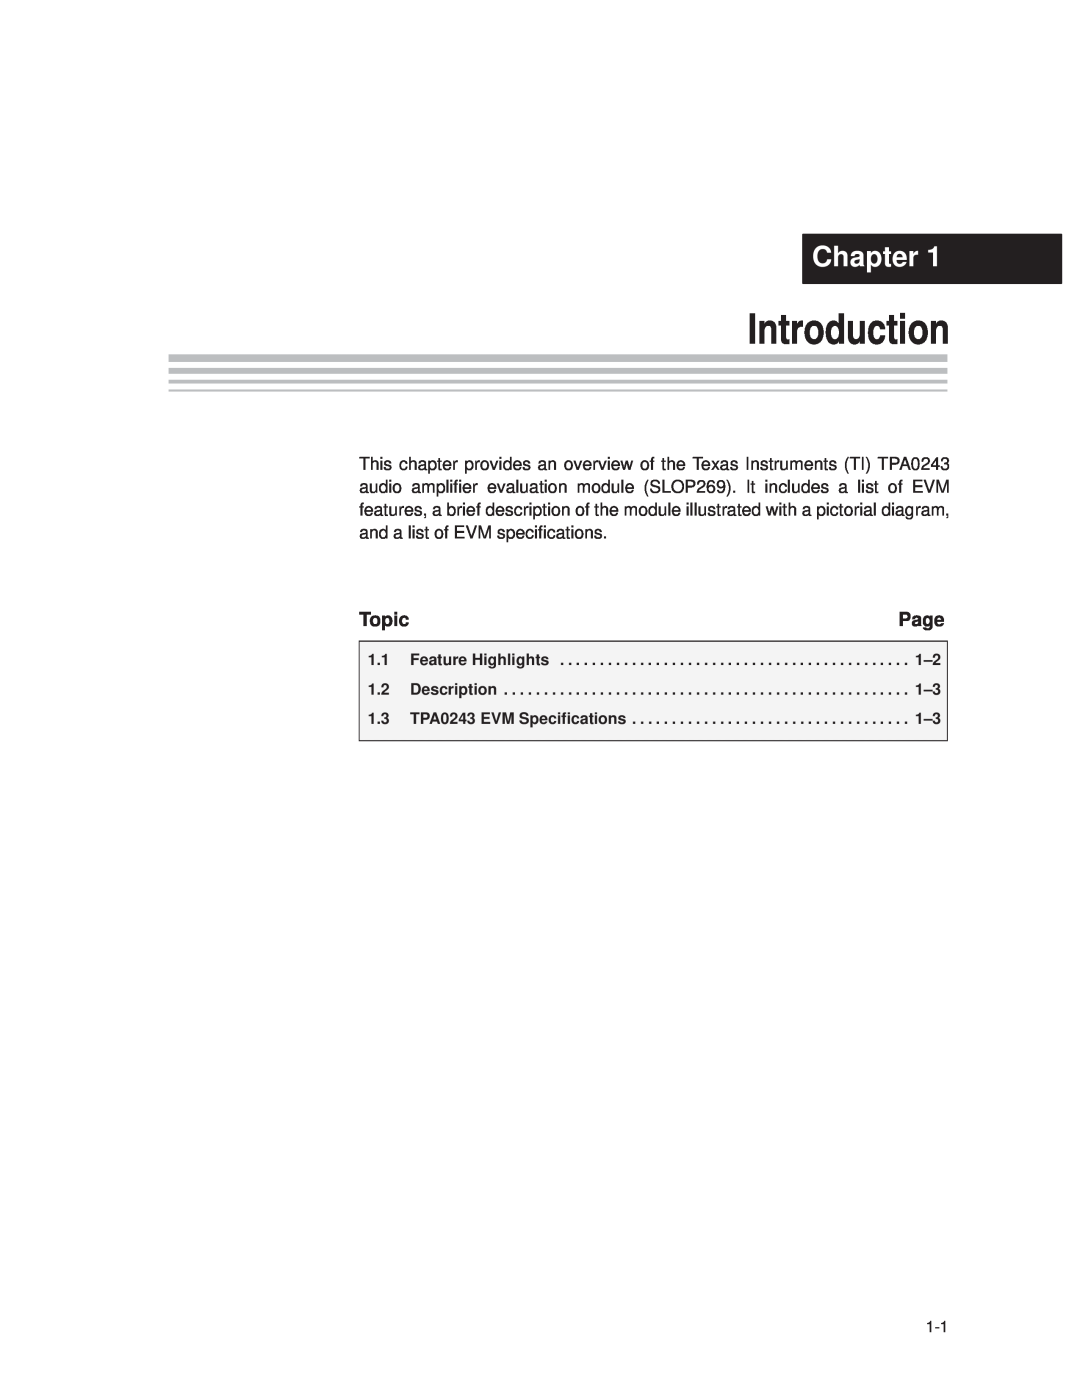 Texas Instruments TPA0243 manual Introduction, Chapter, Page, Topic 